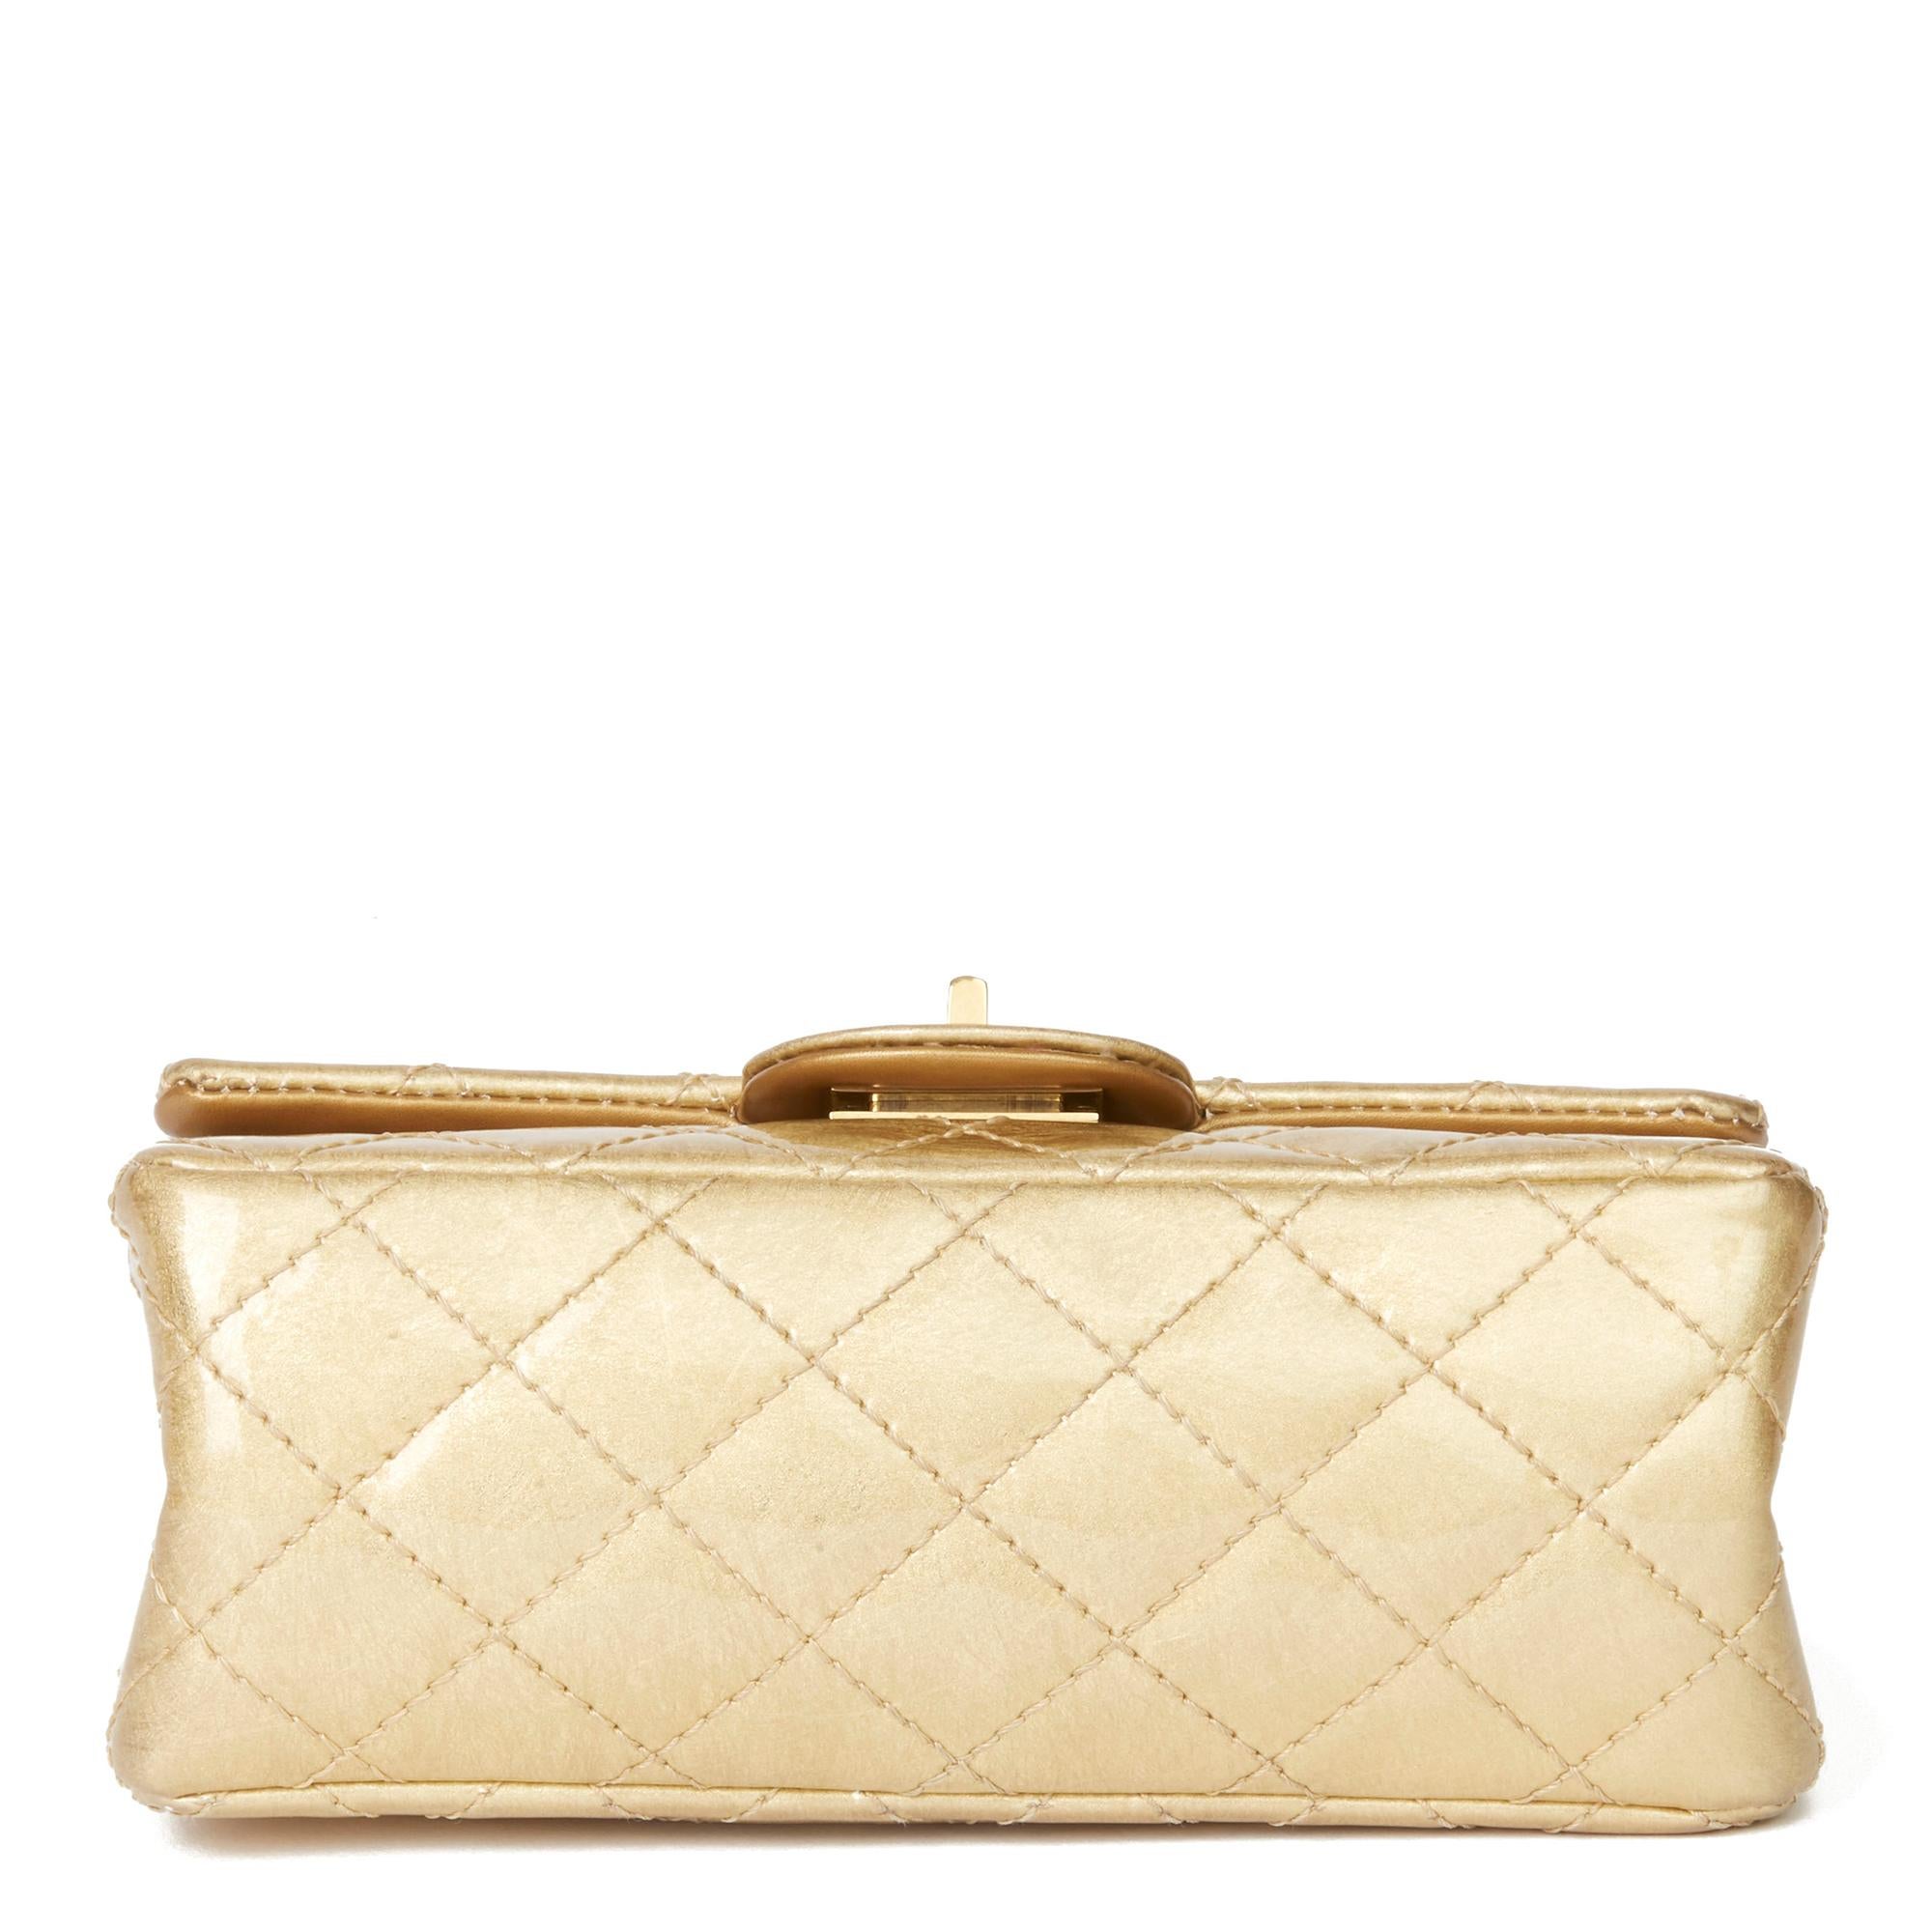 2010 Chanel Gold Quilted Metallic Aged Patent Leather Reissue Double Flap Bag 1